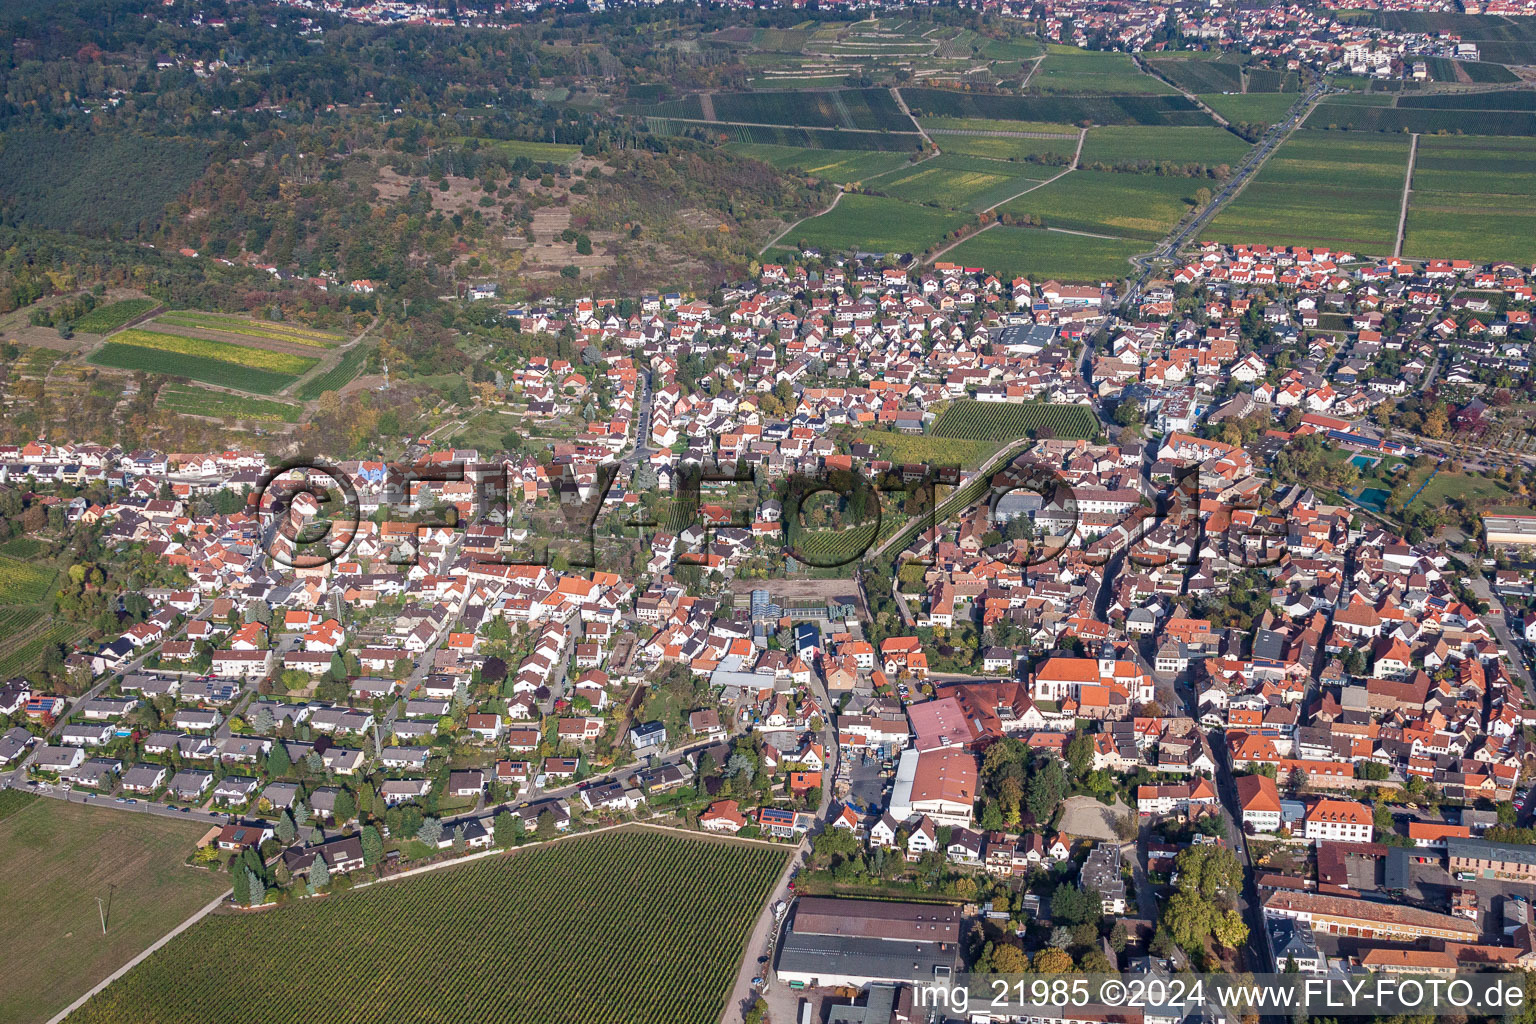 Aerial view of Town View of the streets and houses of the residential areas in Wachenheim an der Weinstrasse in the state Rhineland-Palatinate, Germany